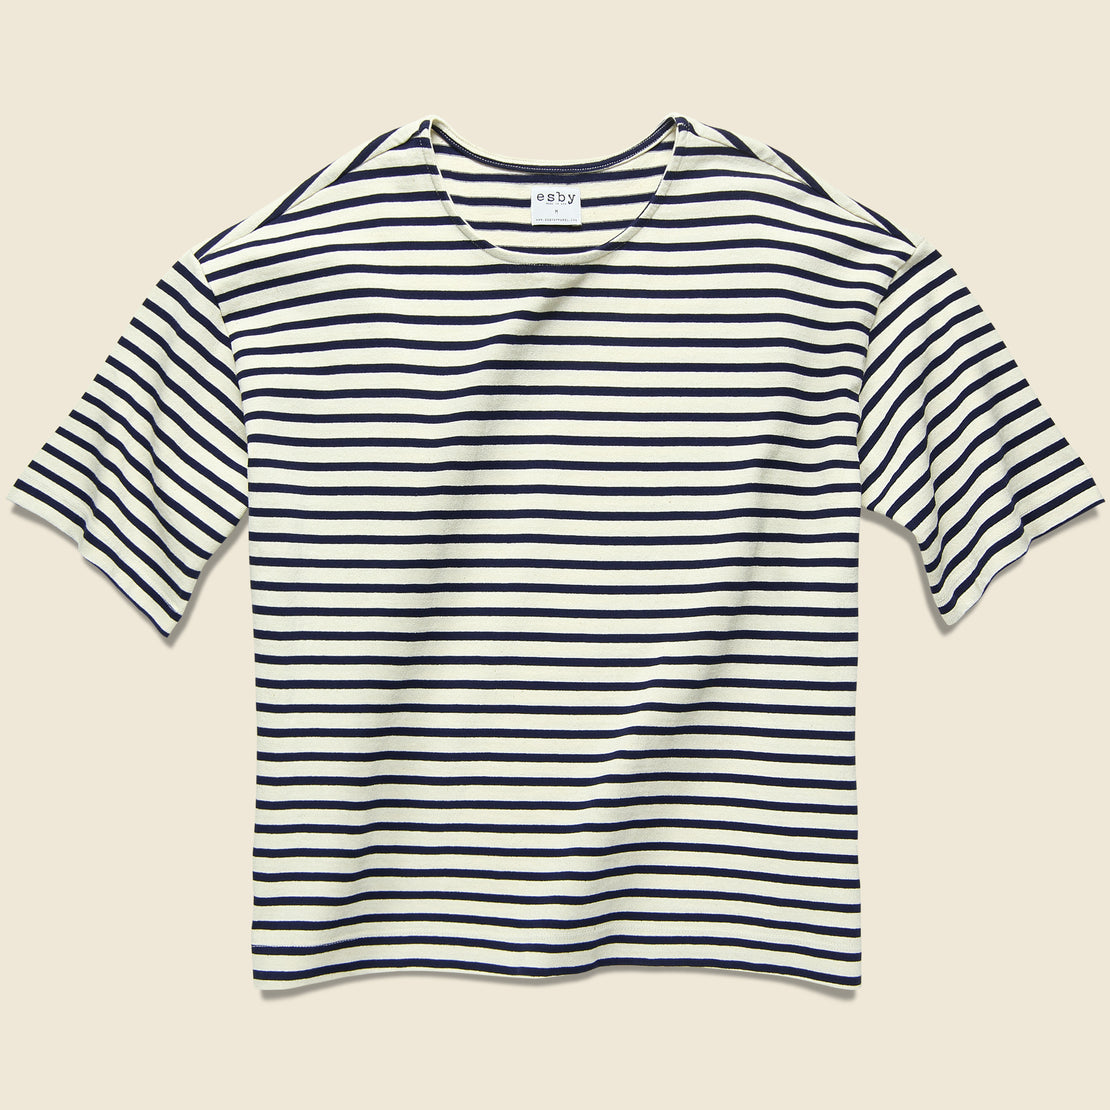 Esby Meredith Knit Top - Natural/Midnight Stripe